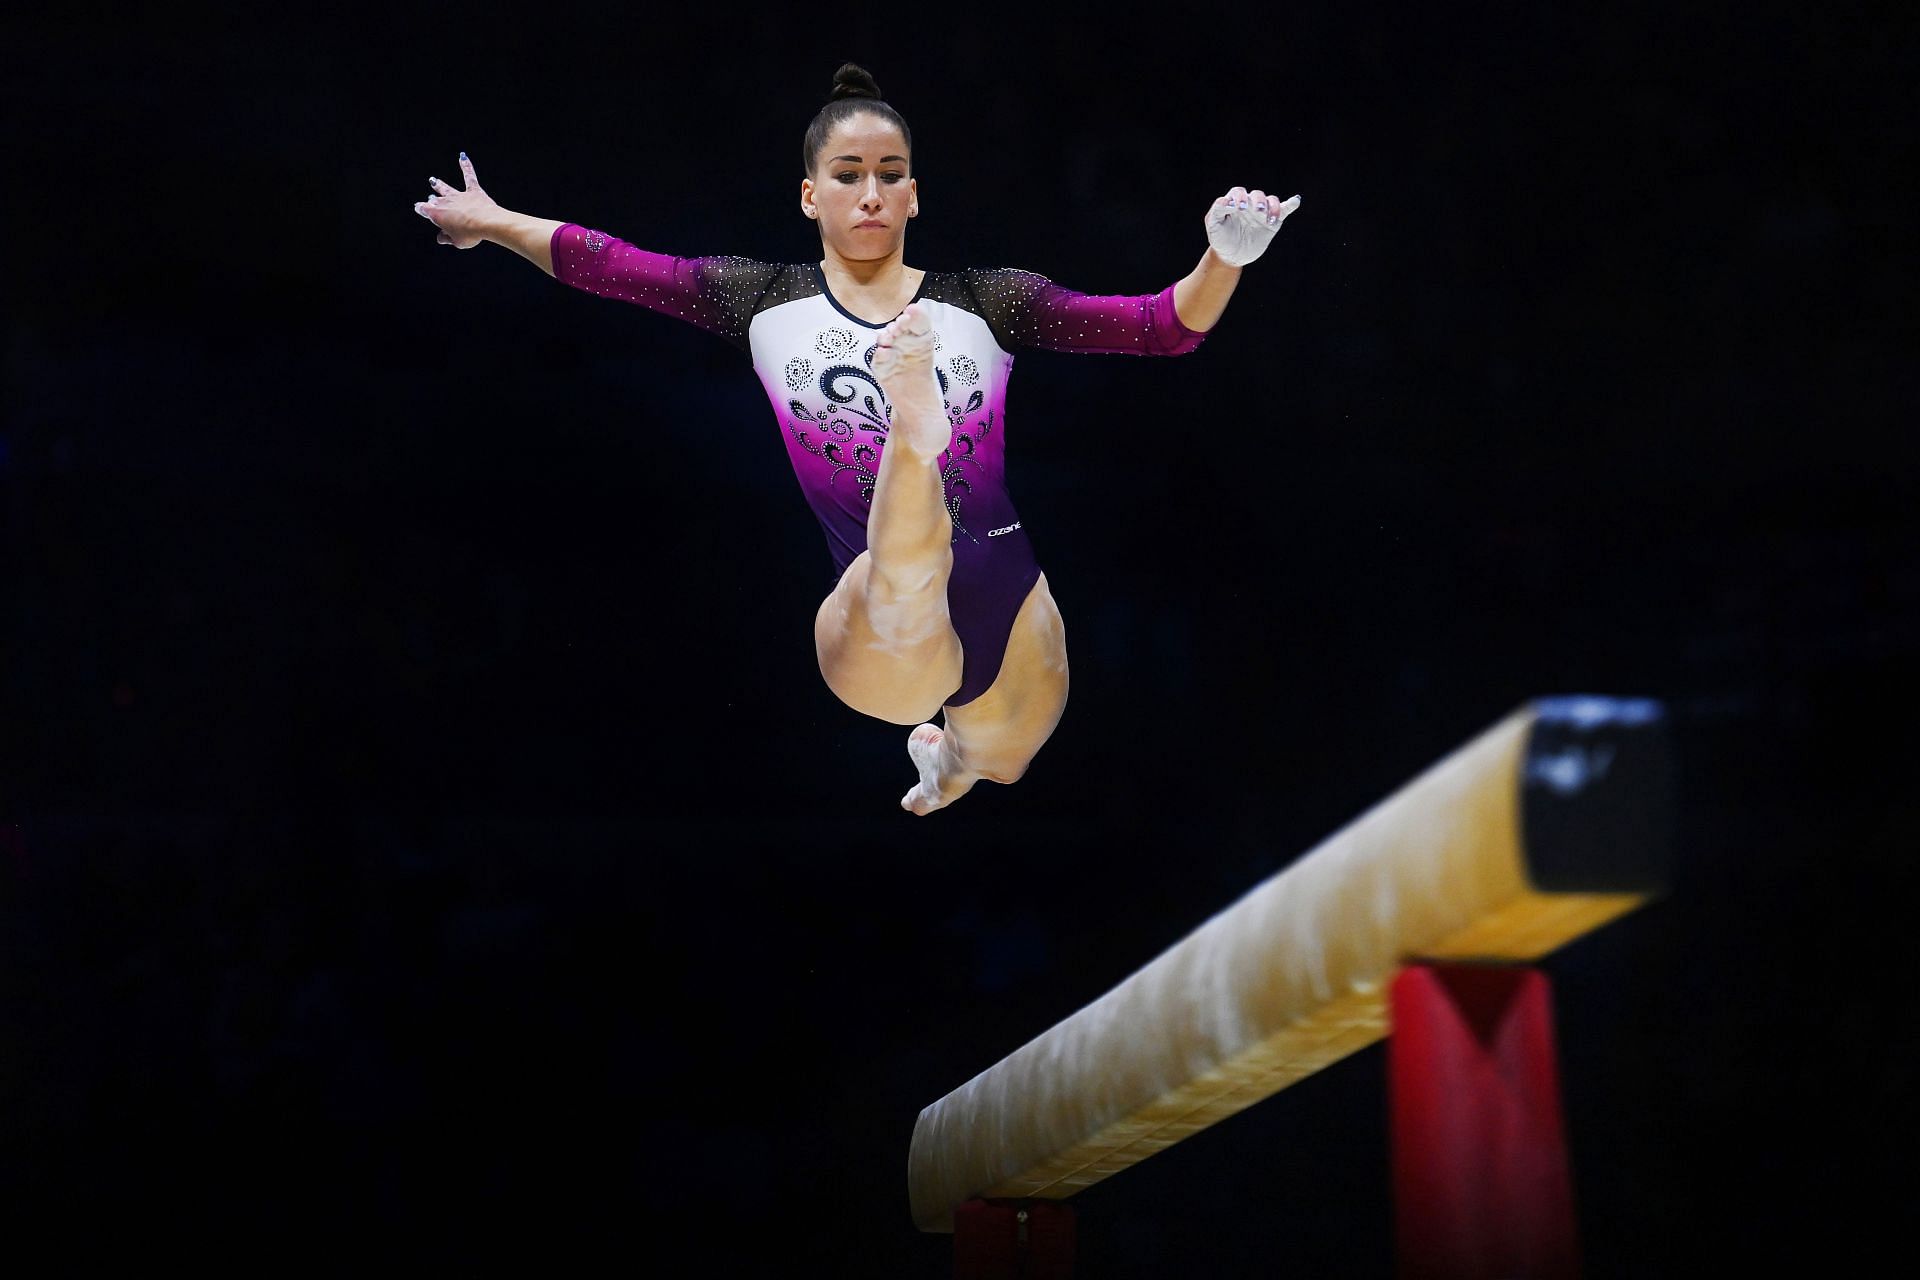 Zsofia Kovacs competes in the women&#039;s balance beam final at the 2022 Gymnastics World Championships in London, England